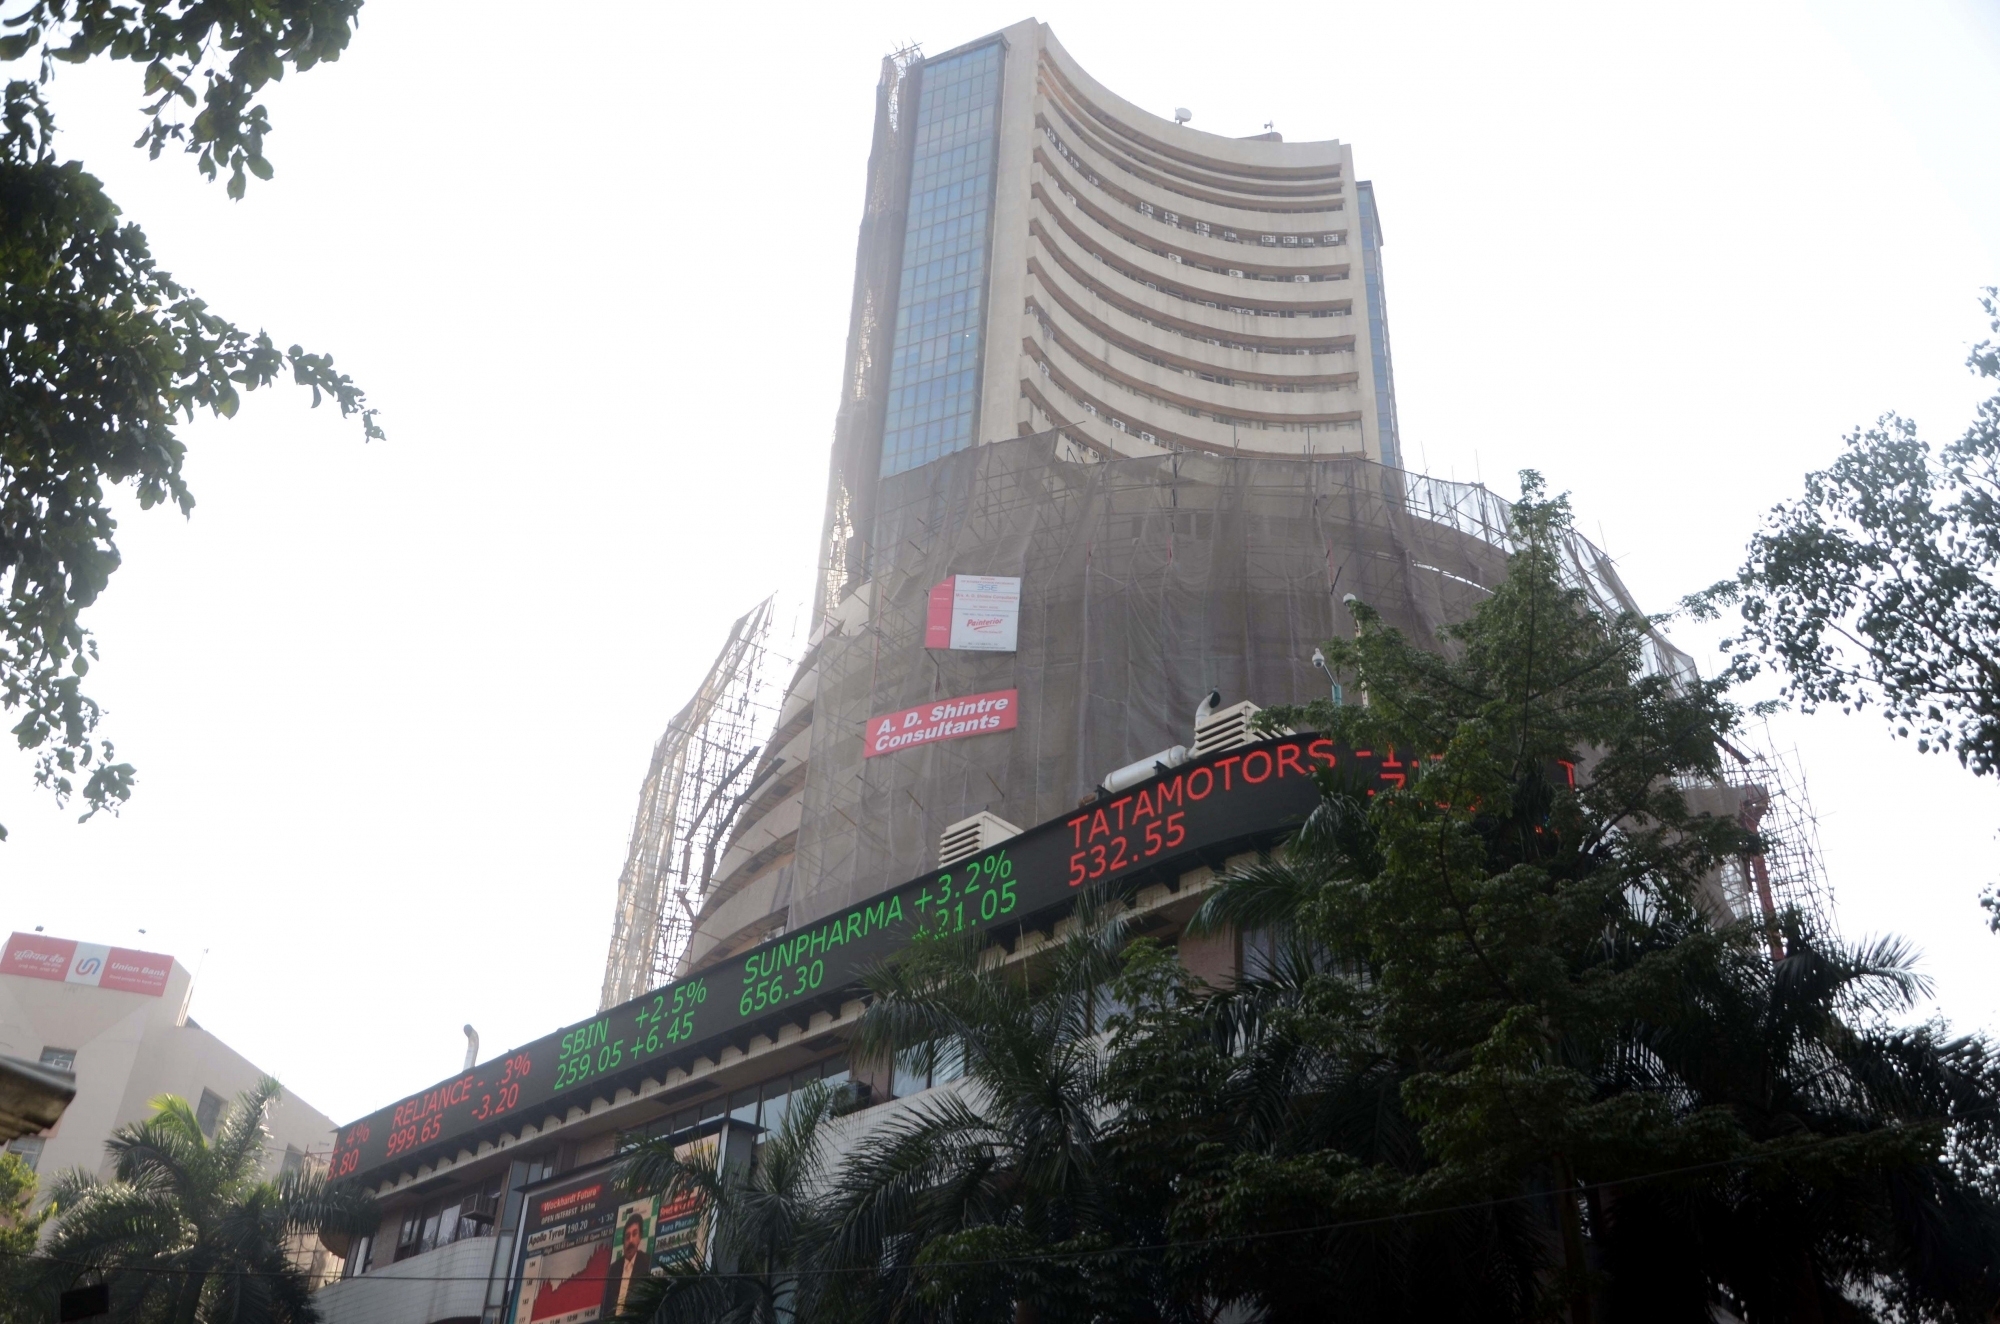 Sensex fluctuates due to fall in global markets, Nifty flat 50